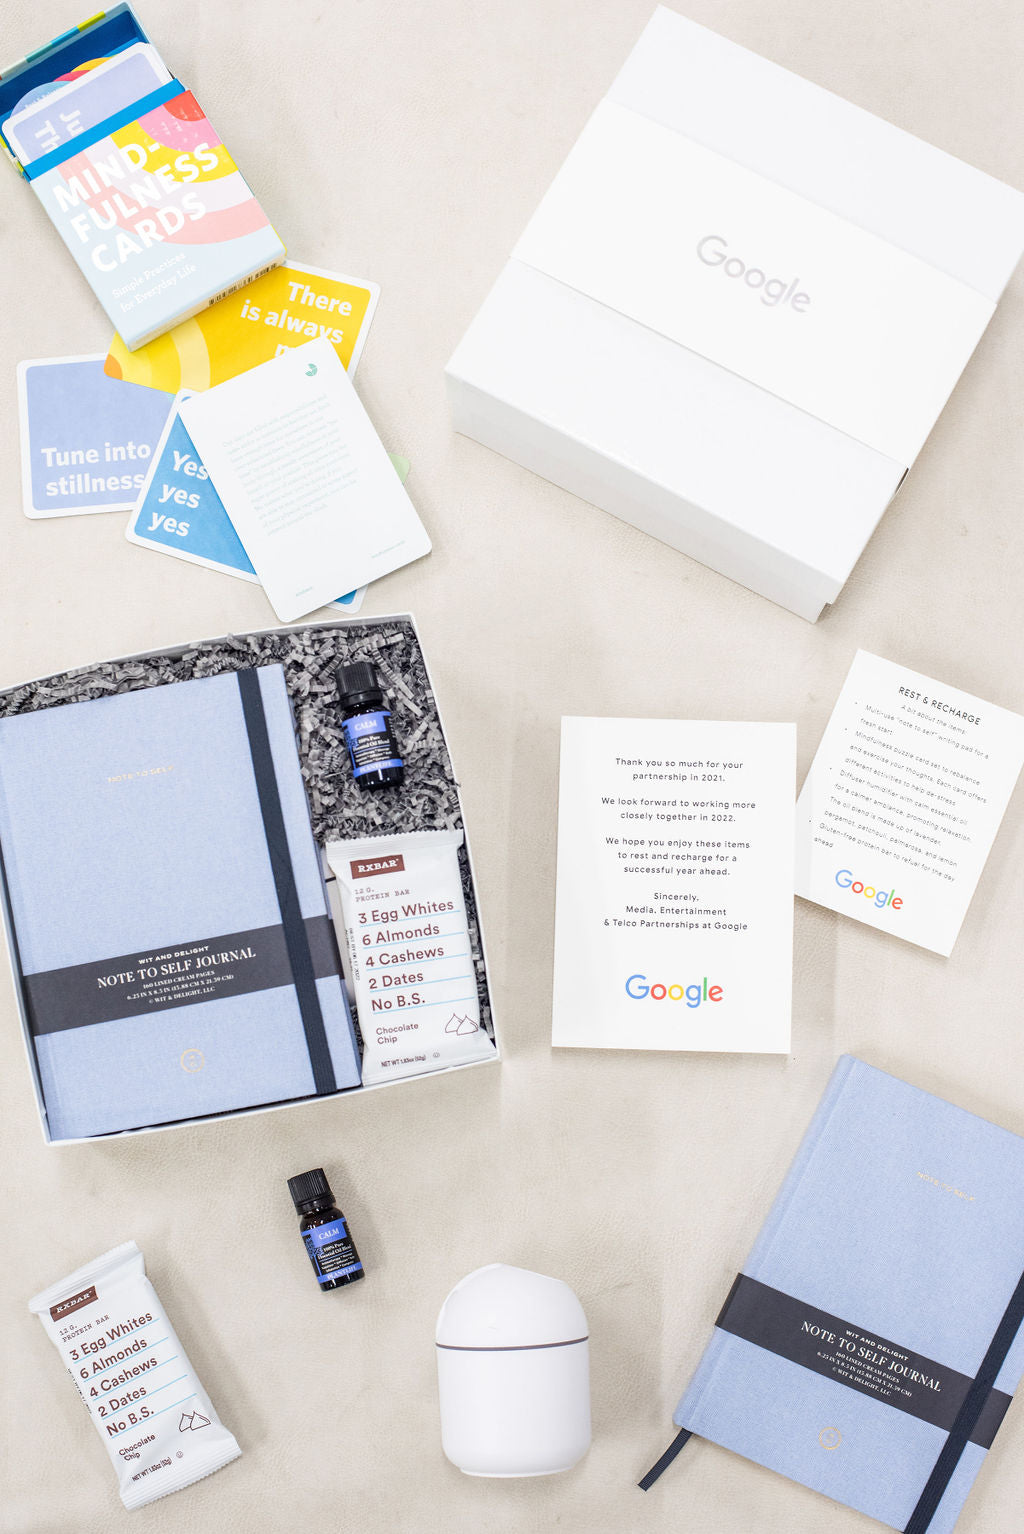 Case Study: Modern “Better Together” Themed Client Gifts